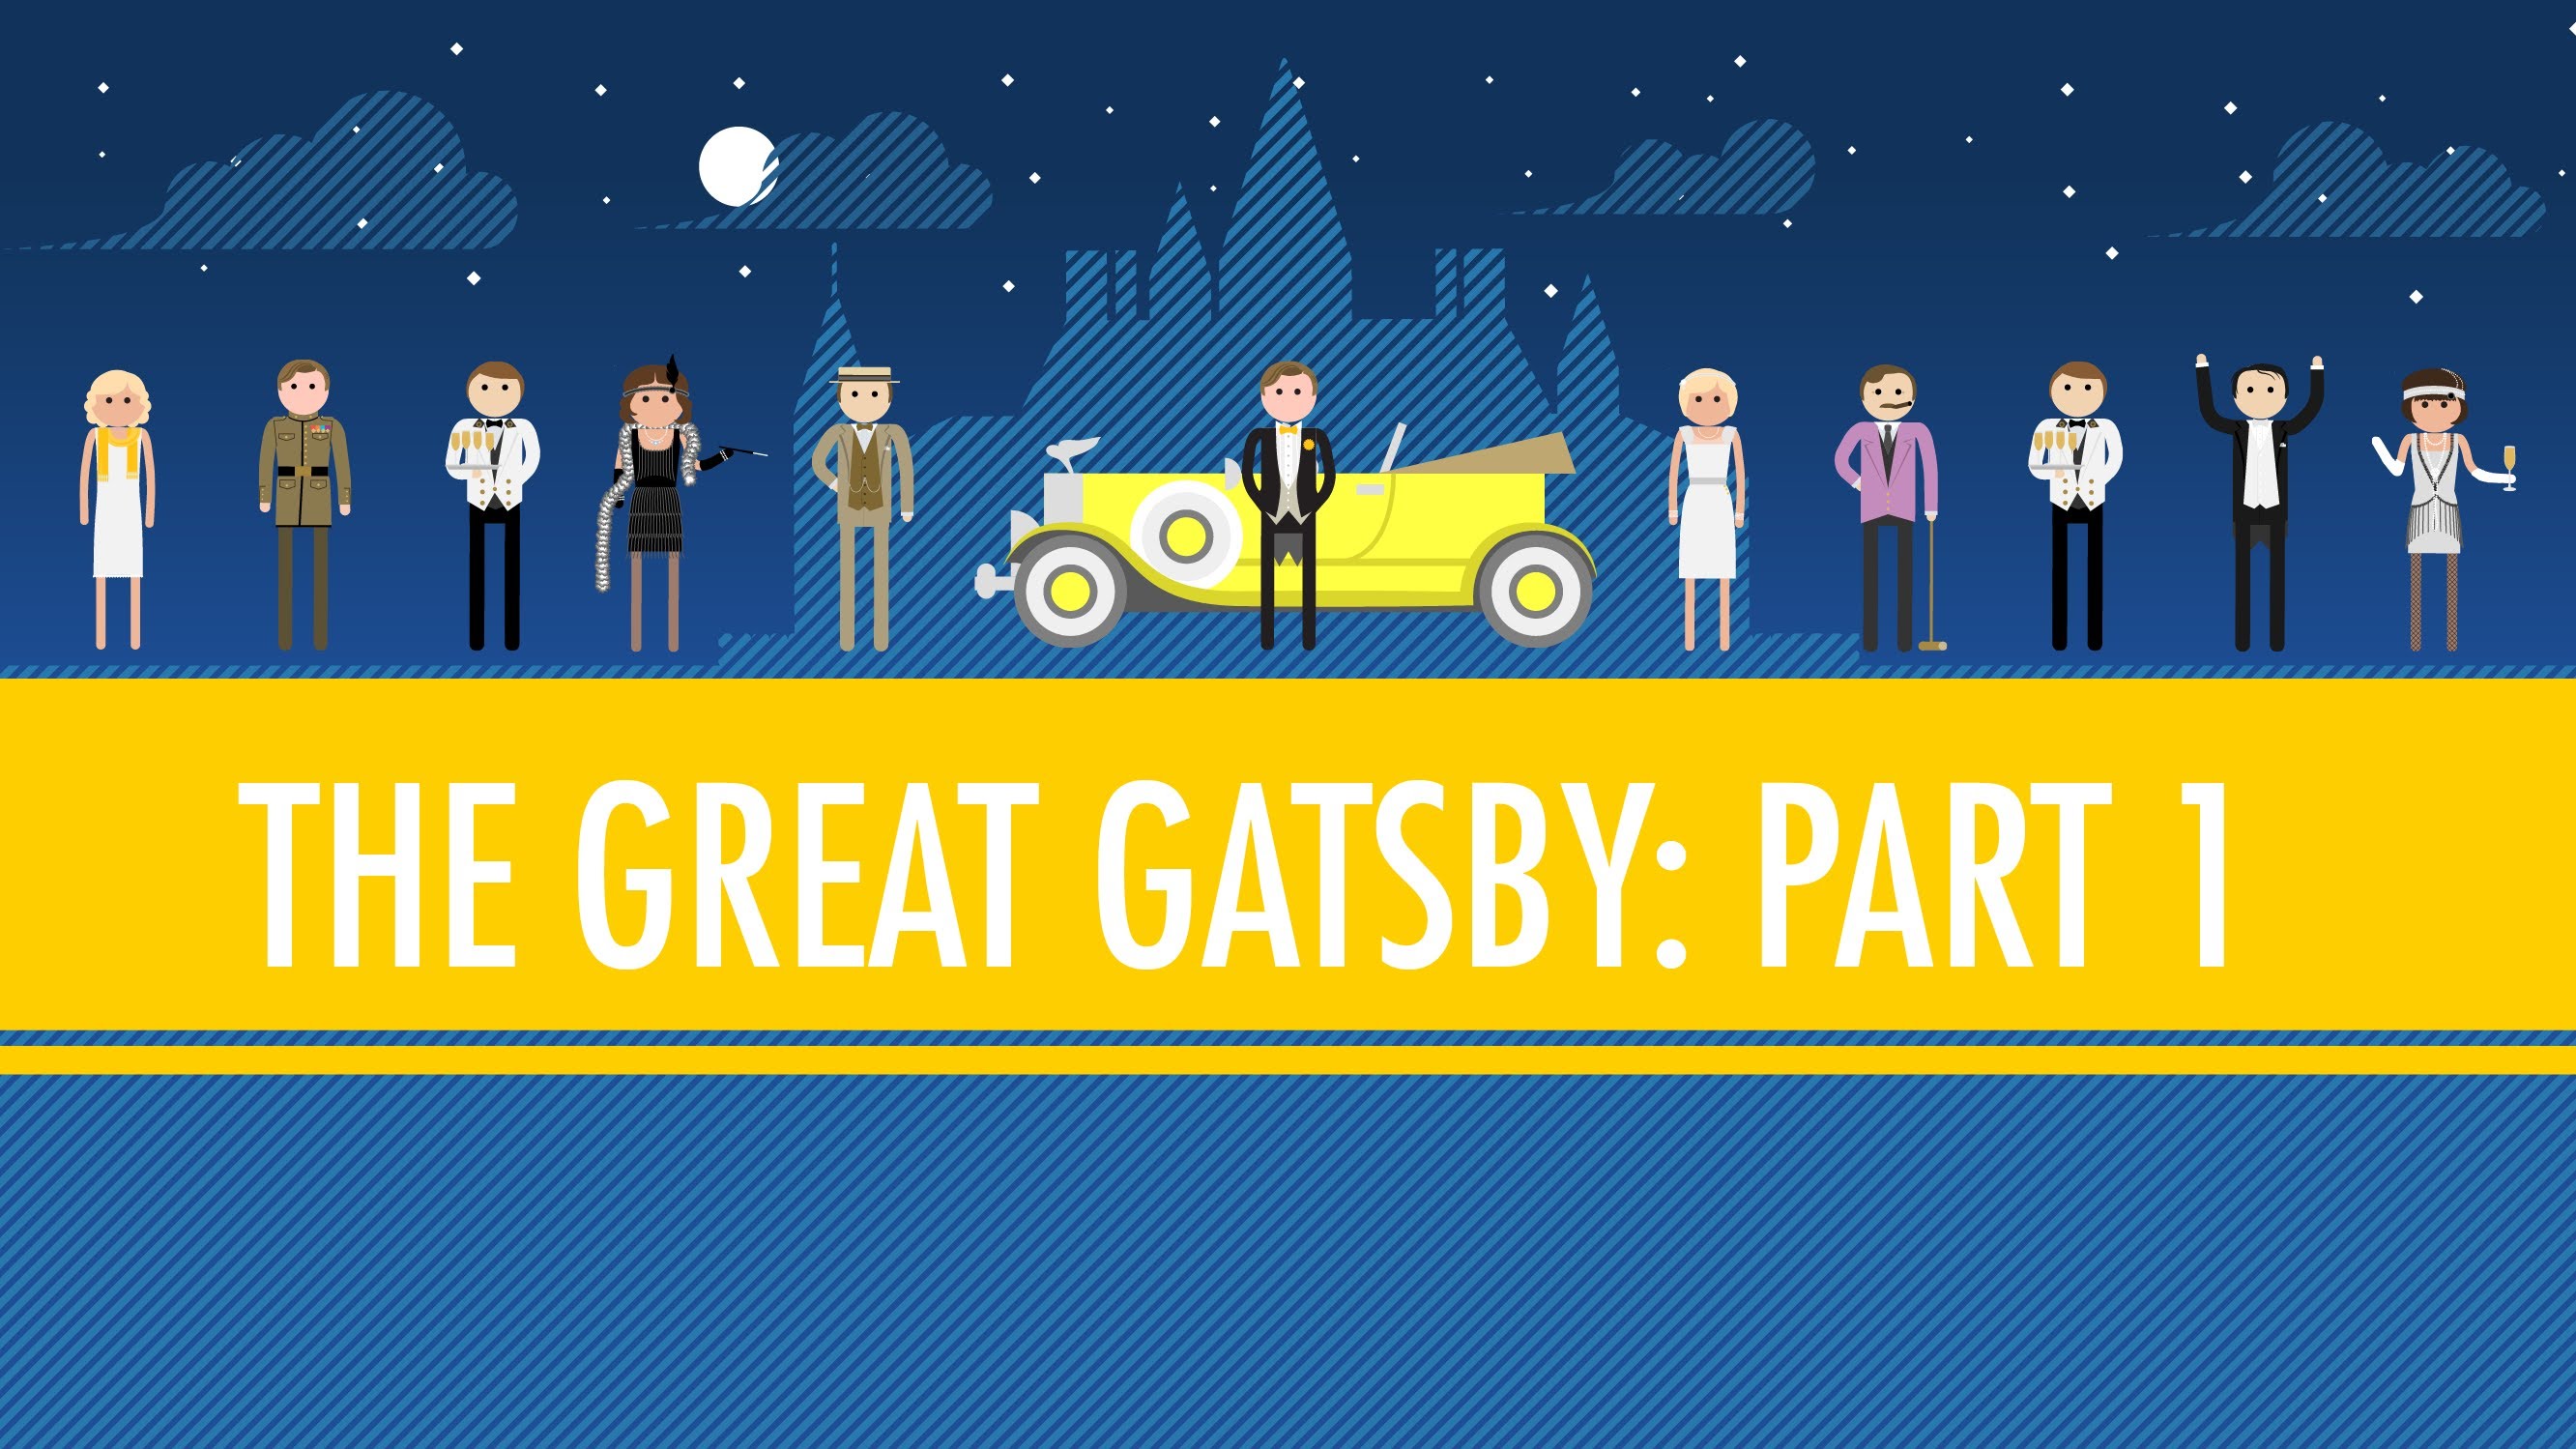 Amazing The Great Gatsby Pictures & Backgrounds - Crash Course Great Gatsby - HD Wallpaper 